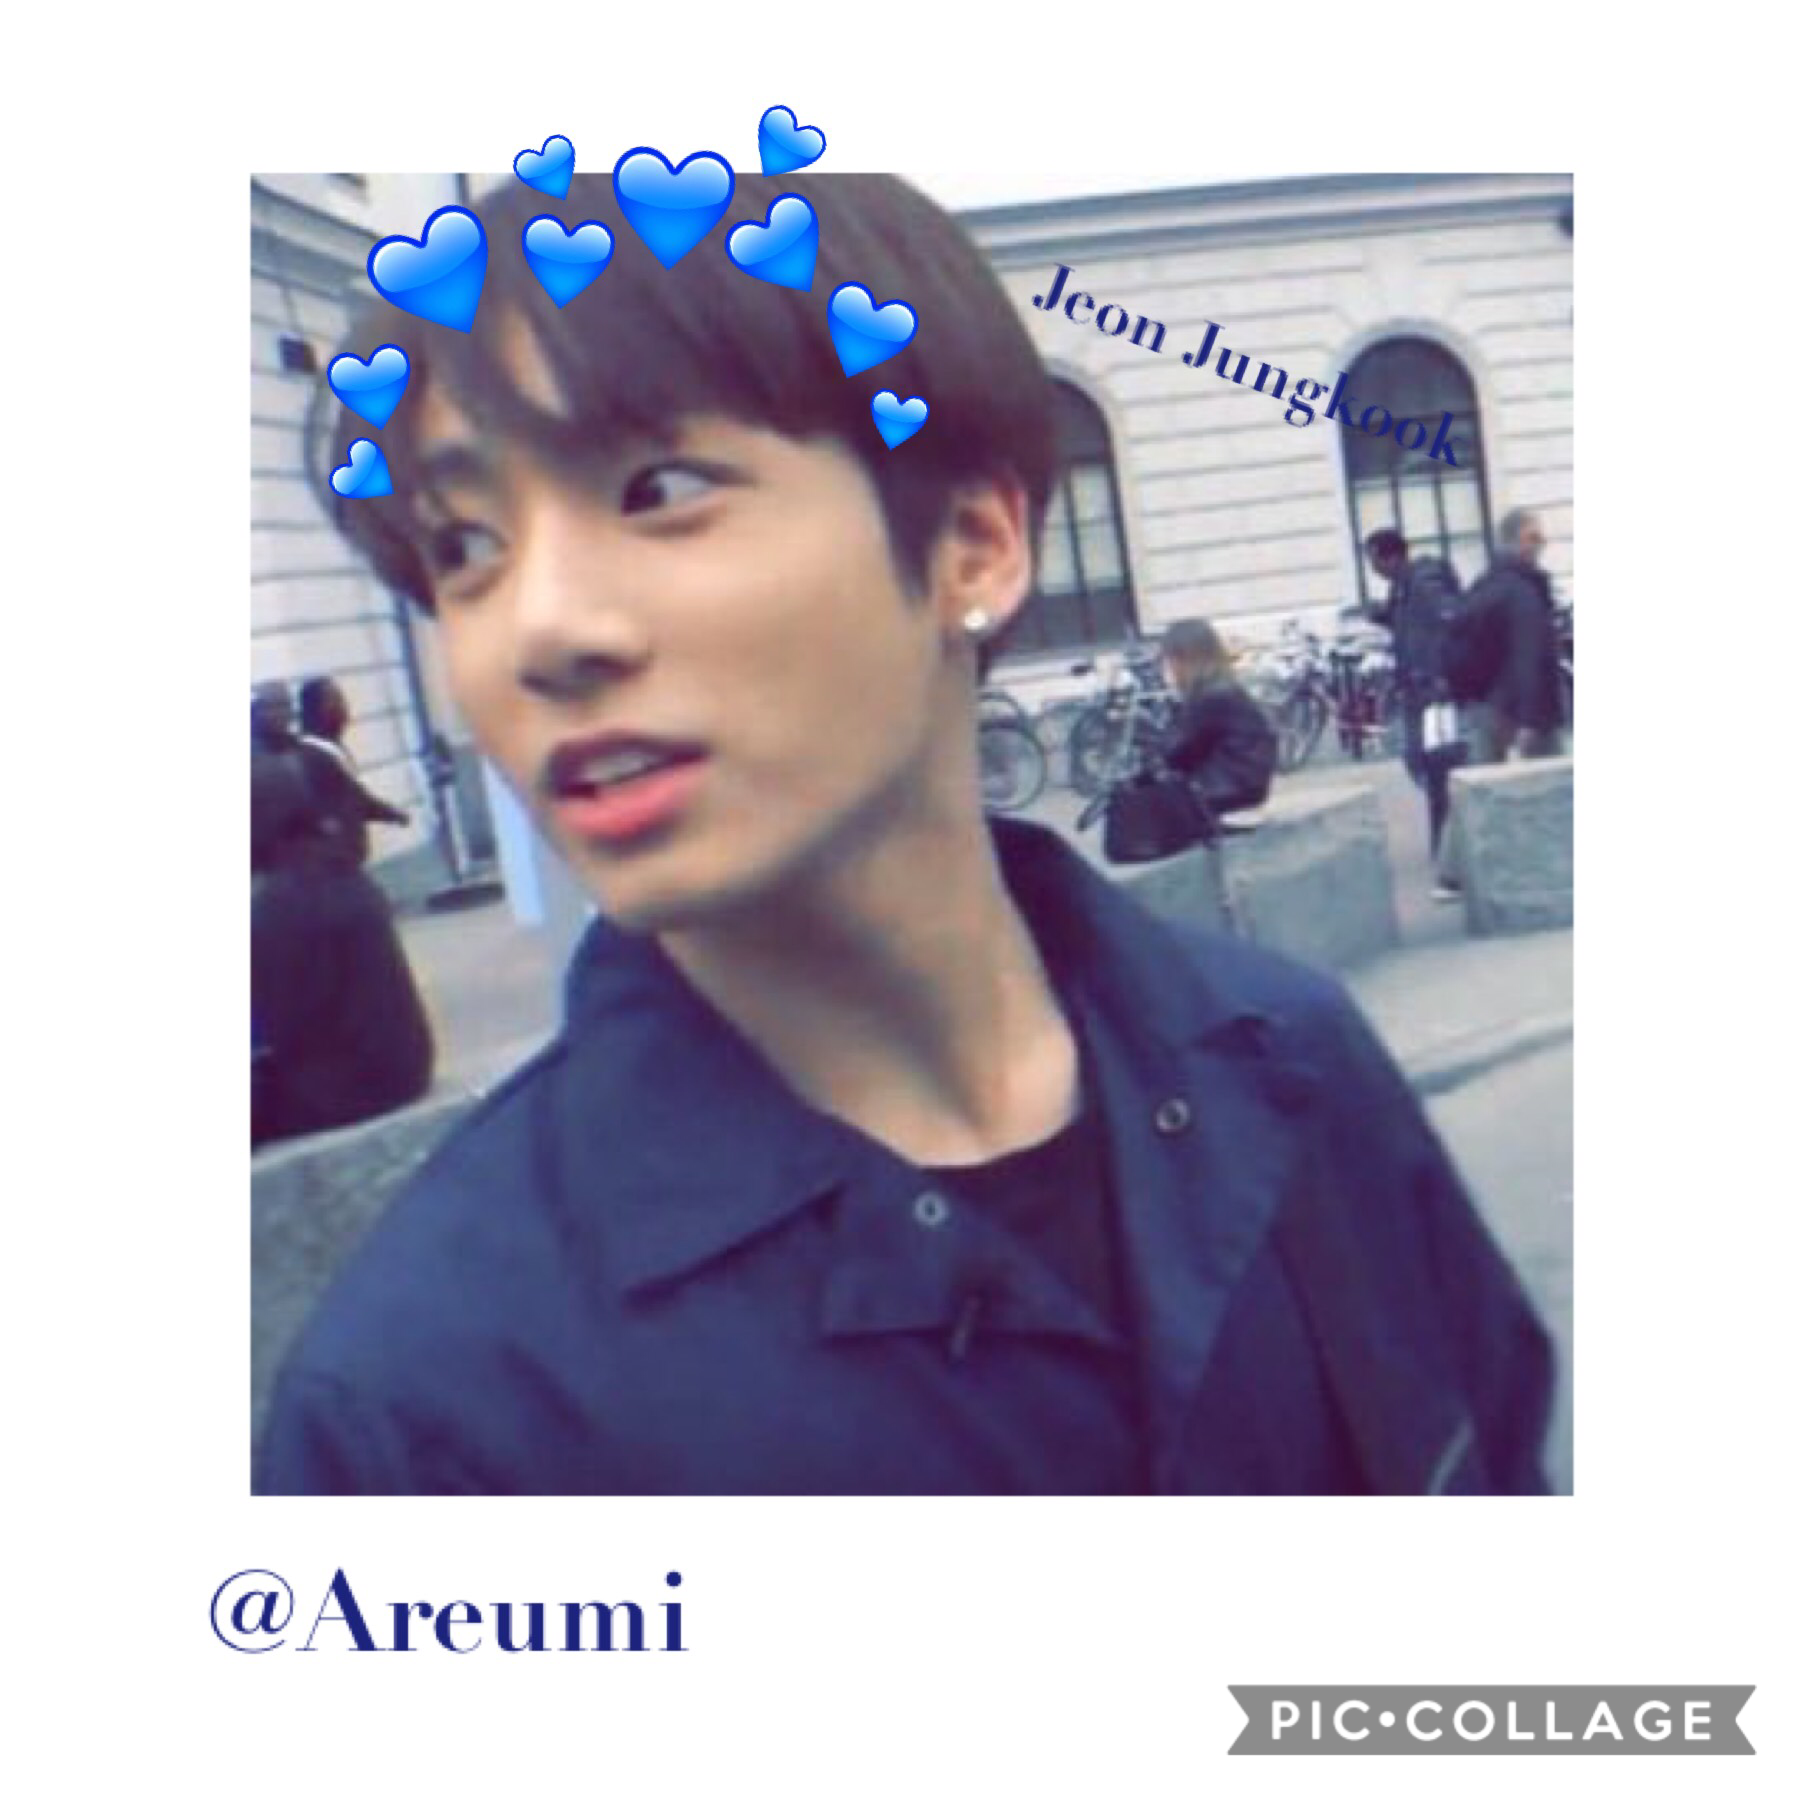 Jungkook 💙 Follow me and like ! Comment and let me know if u have a idol u would like me to do < Areumi < luv ya 💙